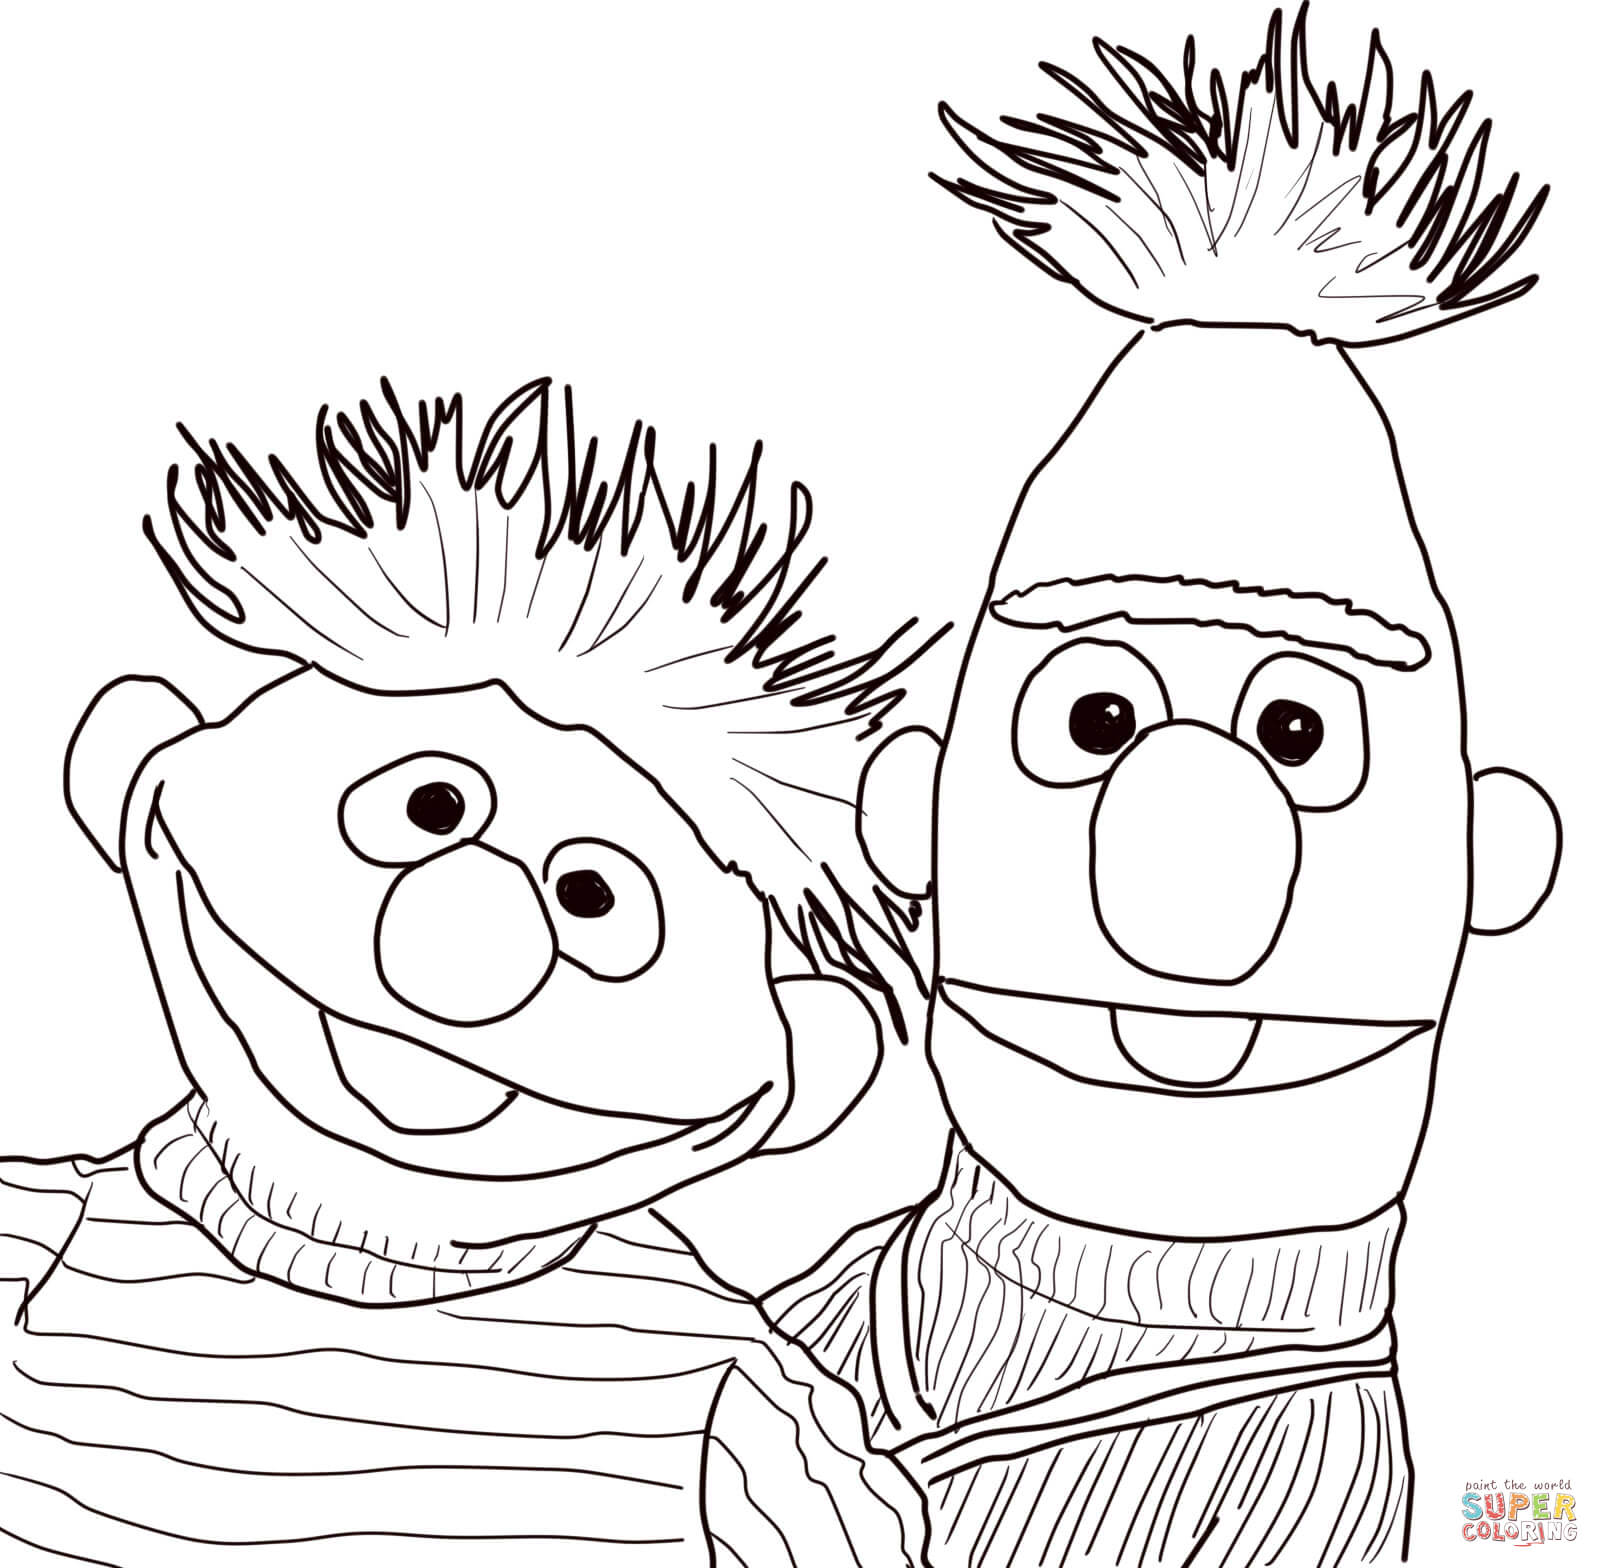 Bert, Ernie and Rubber Duckie coloring page | Free Printable ...